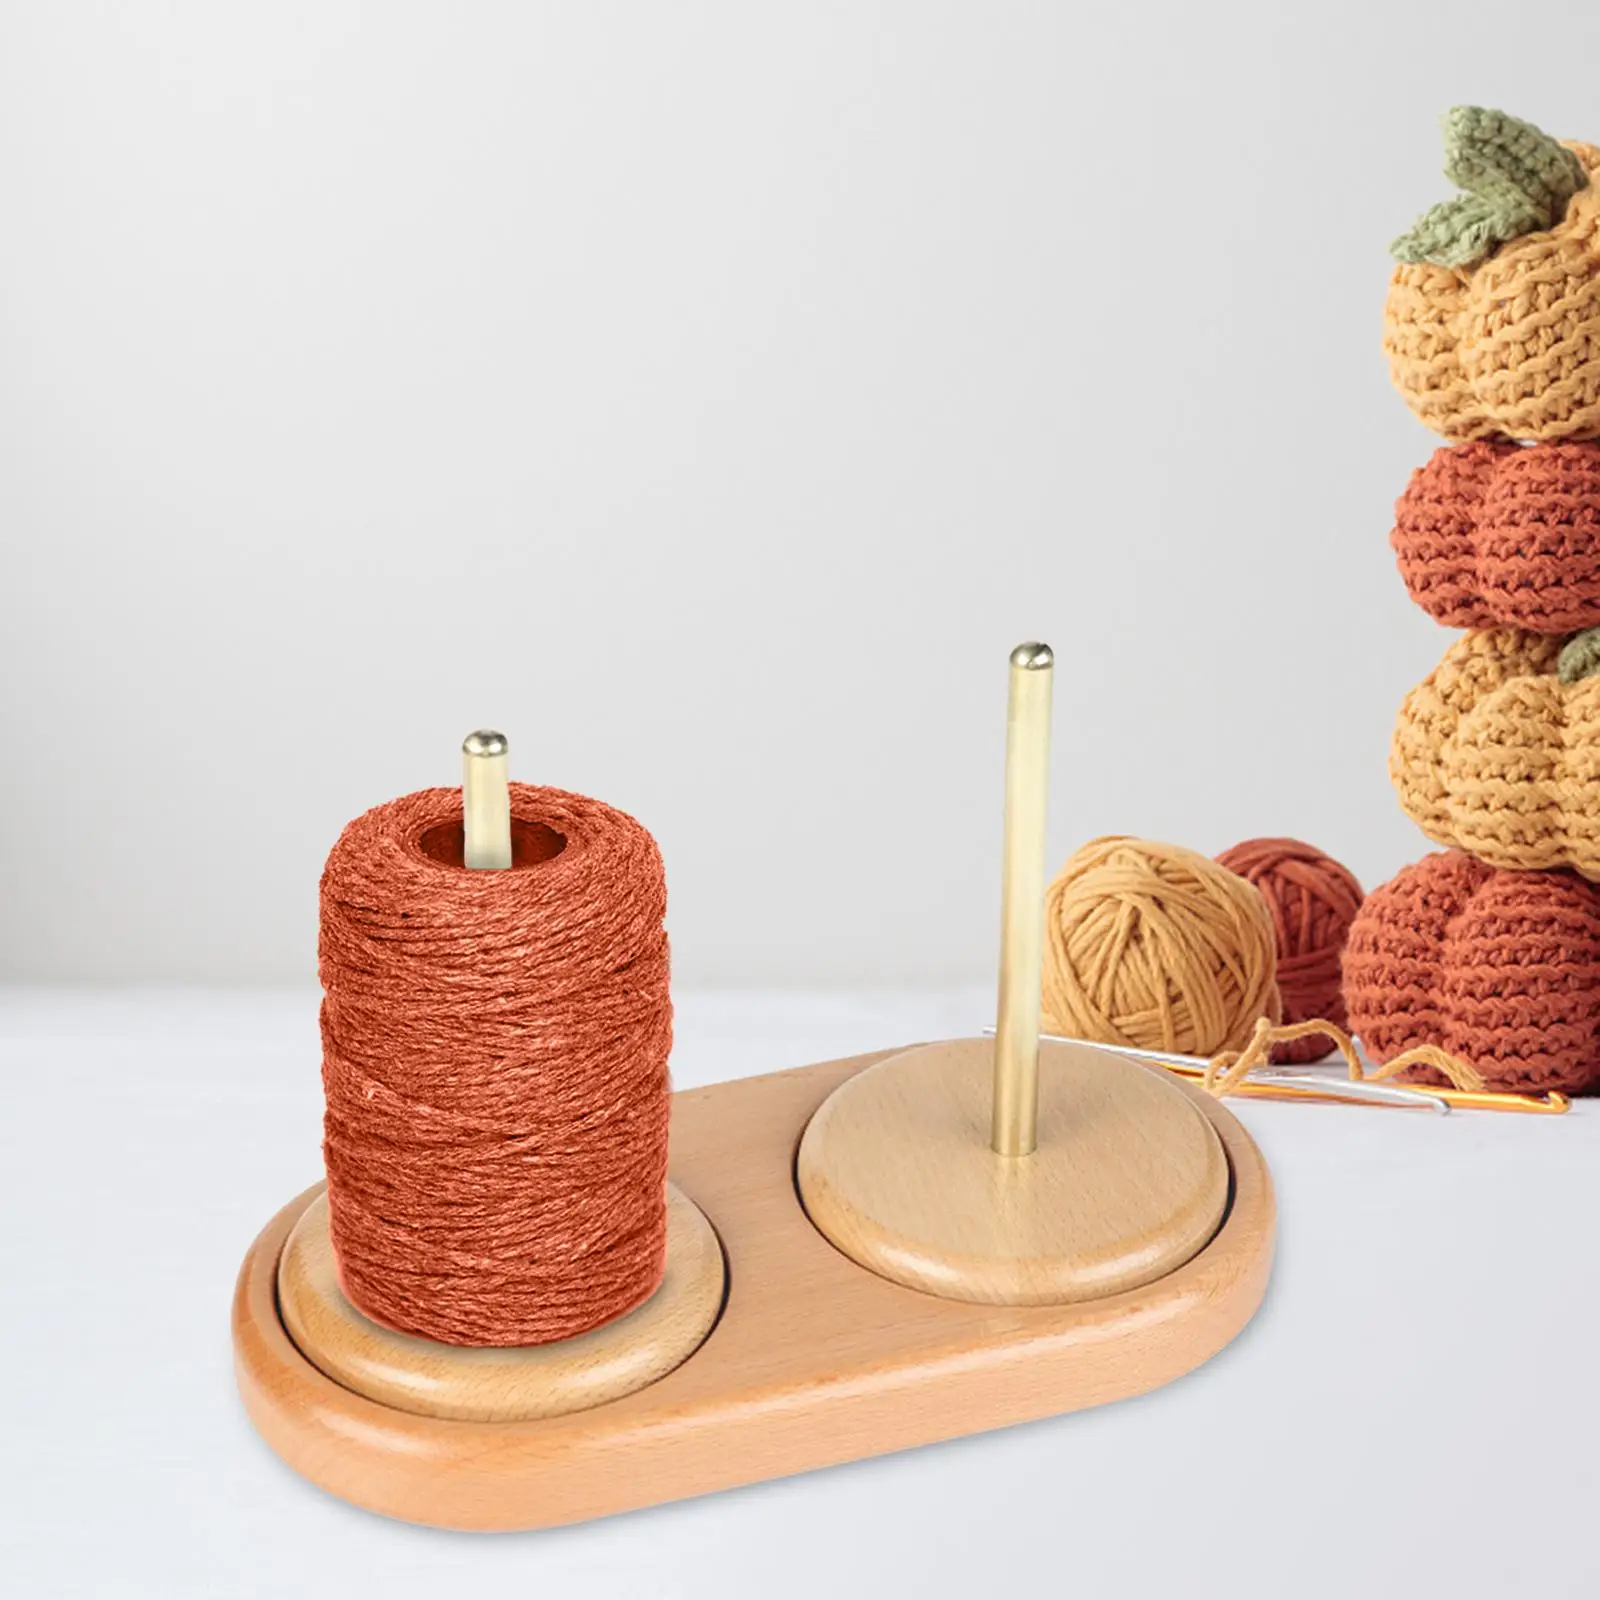 Creative Yarn Holder Hold 2 yarns Prevent Thread Tangling Roll Paper Towel Holder Durable Yarn Dispenser for Wife